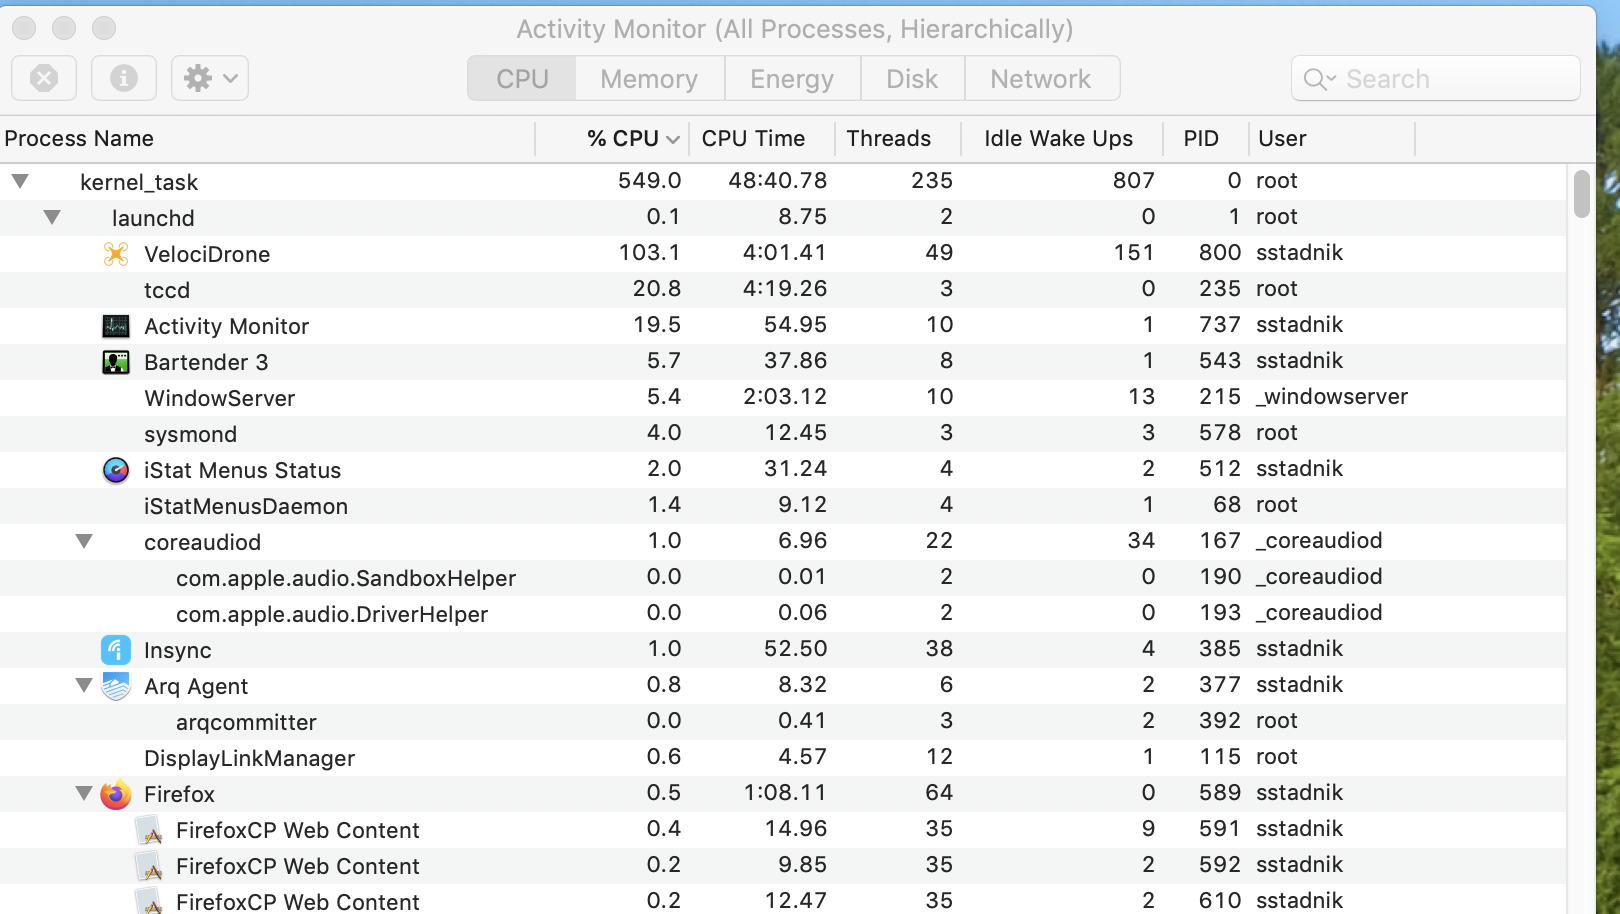 CPU is consumed by kernel_task process